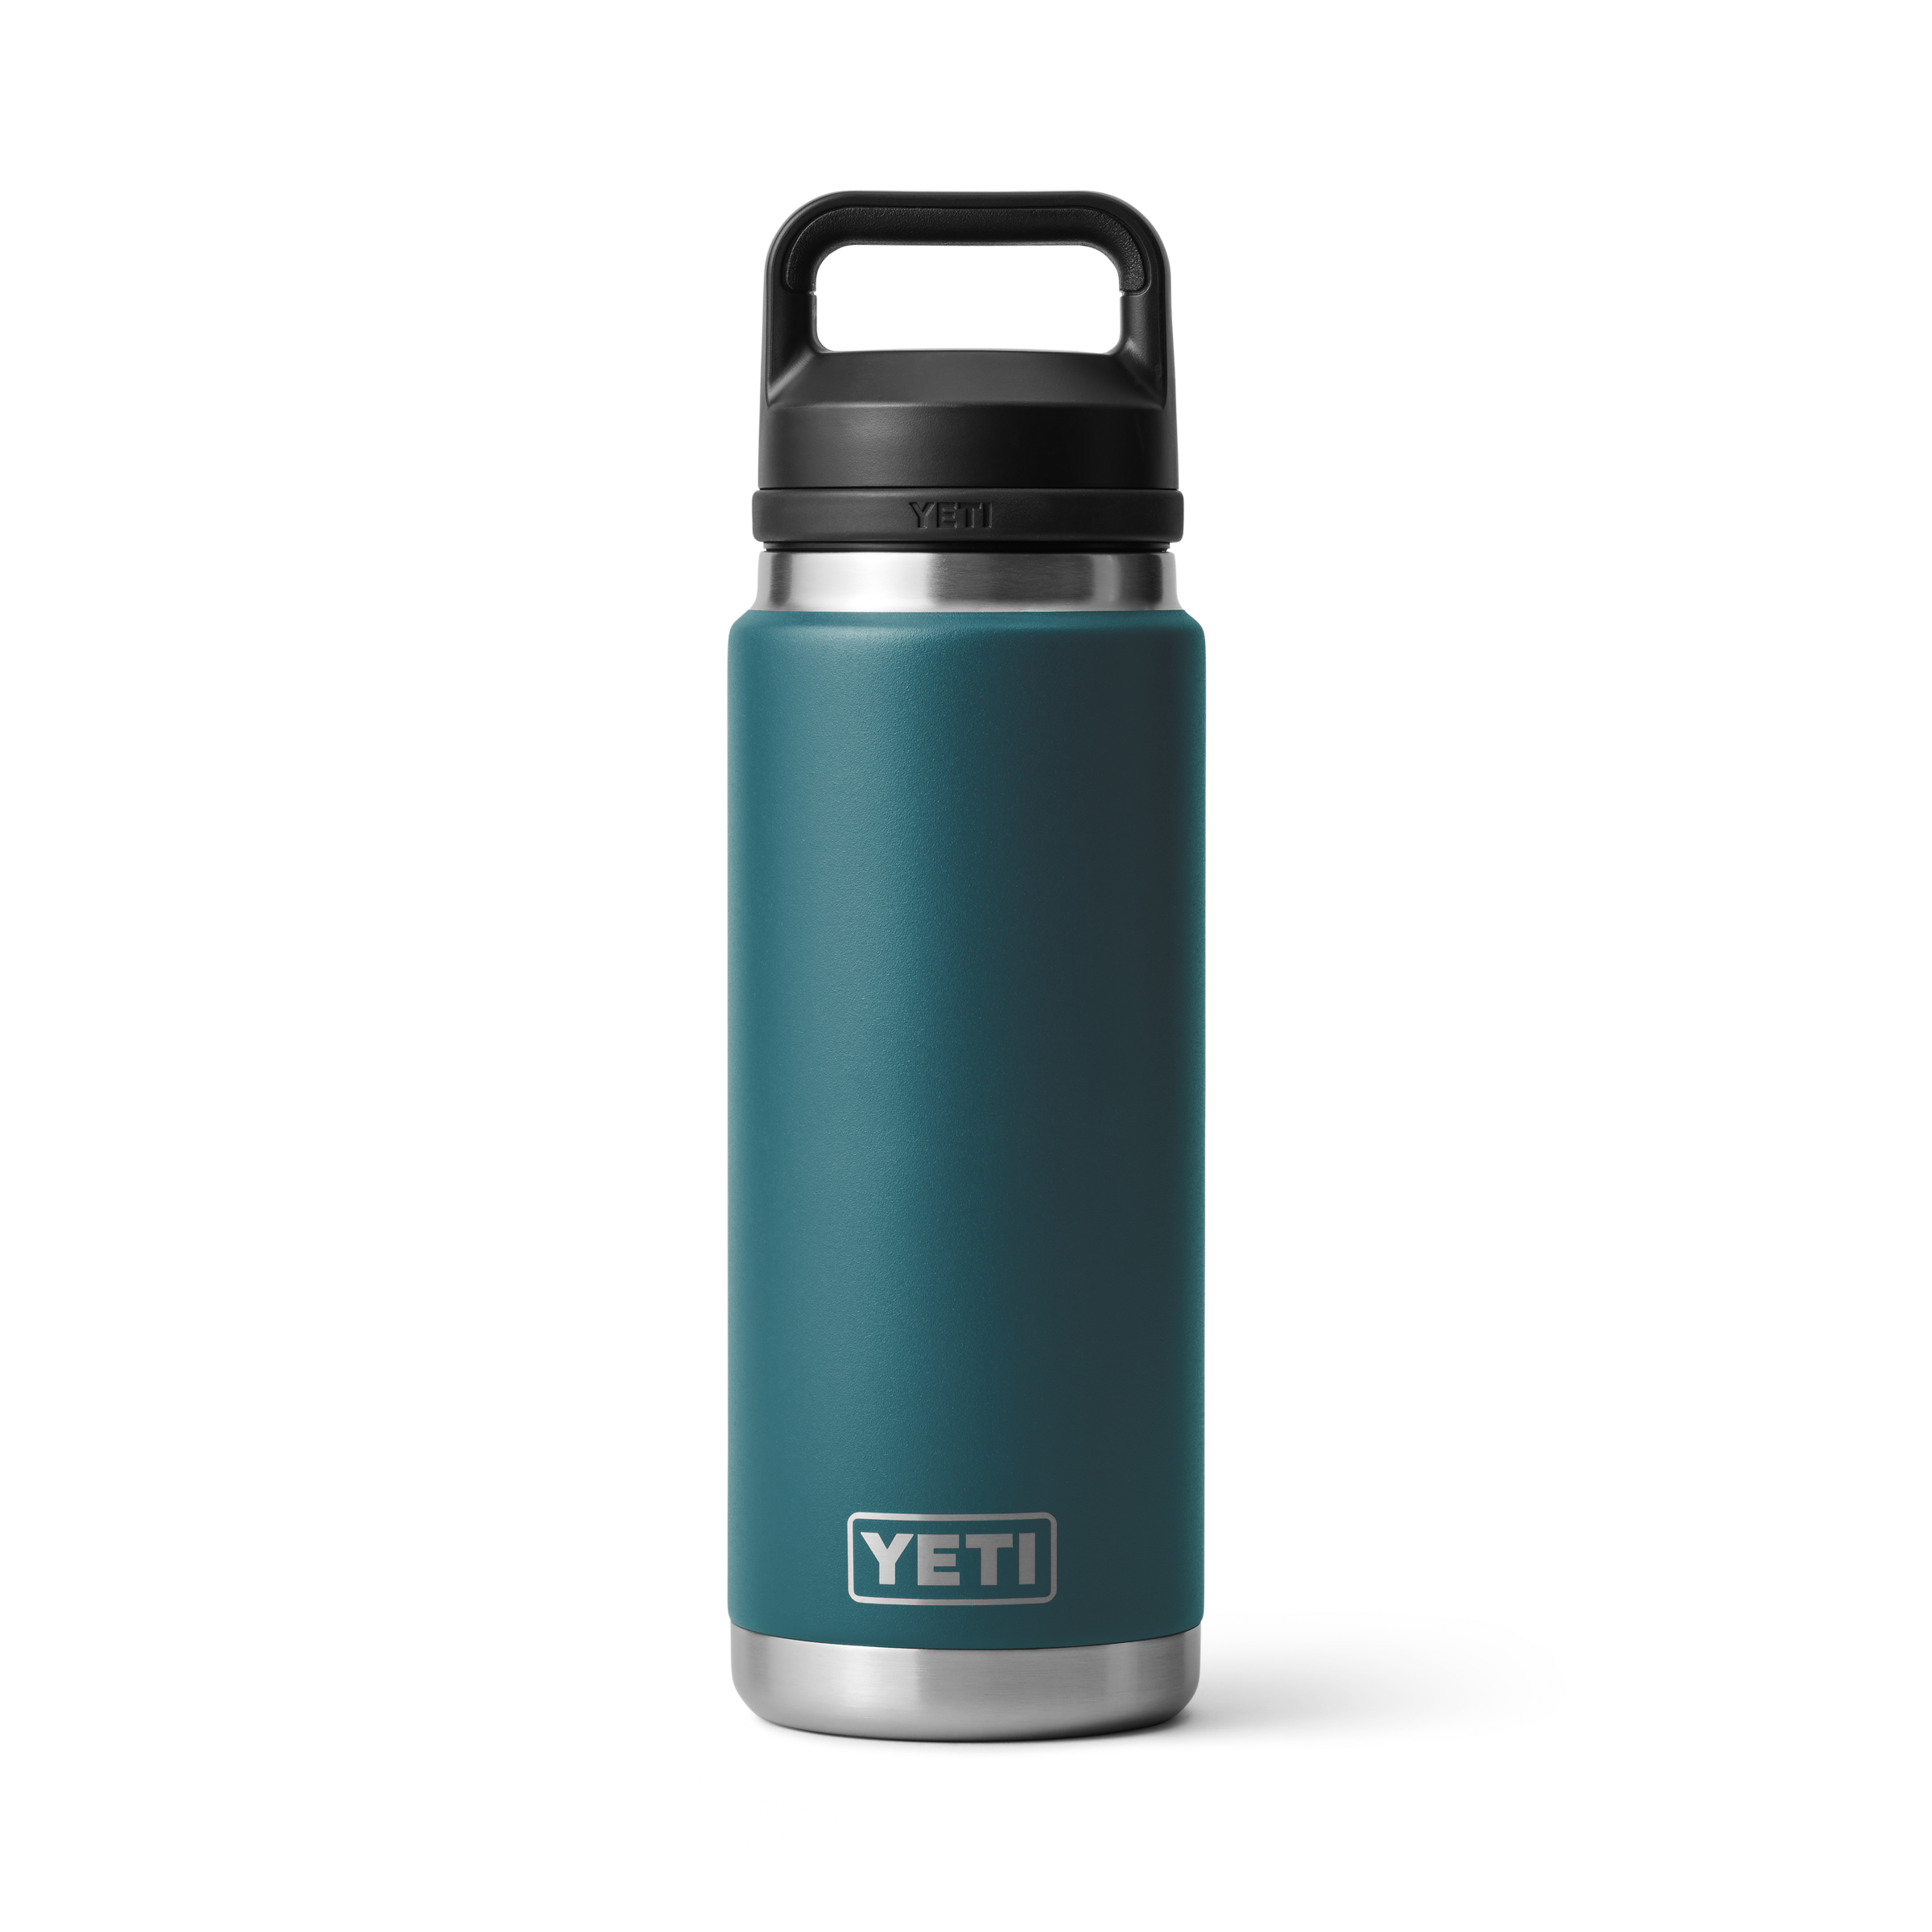 drink bottle, 100% leak proof, double wall vacuum insulation, easy to carry, keeps cool drinks cold, dishwasher safe, yeti